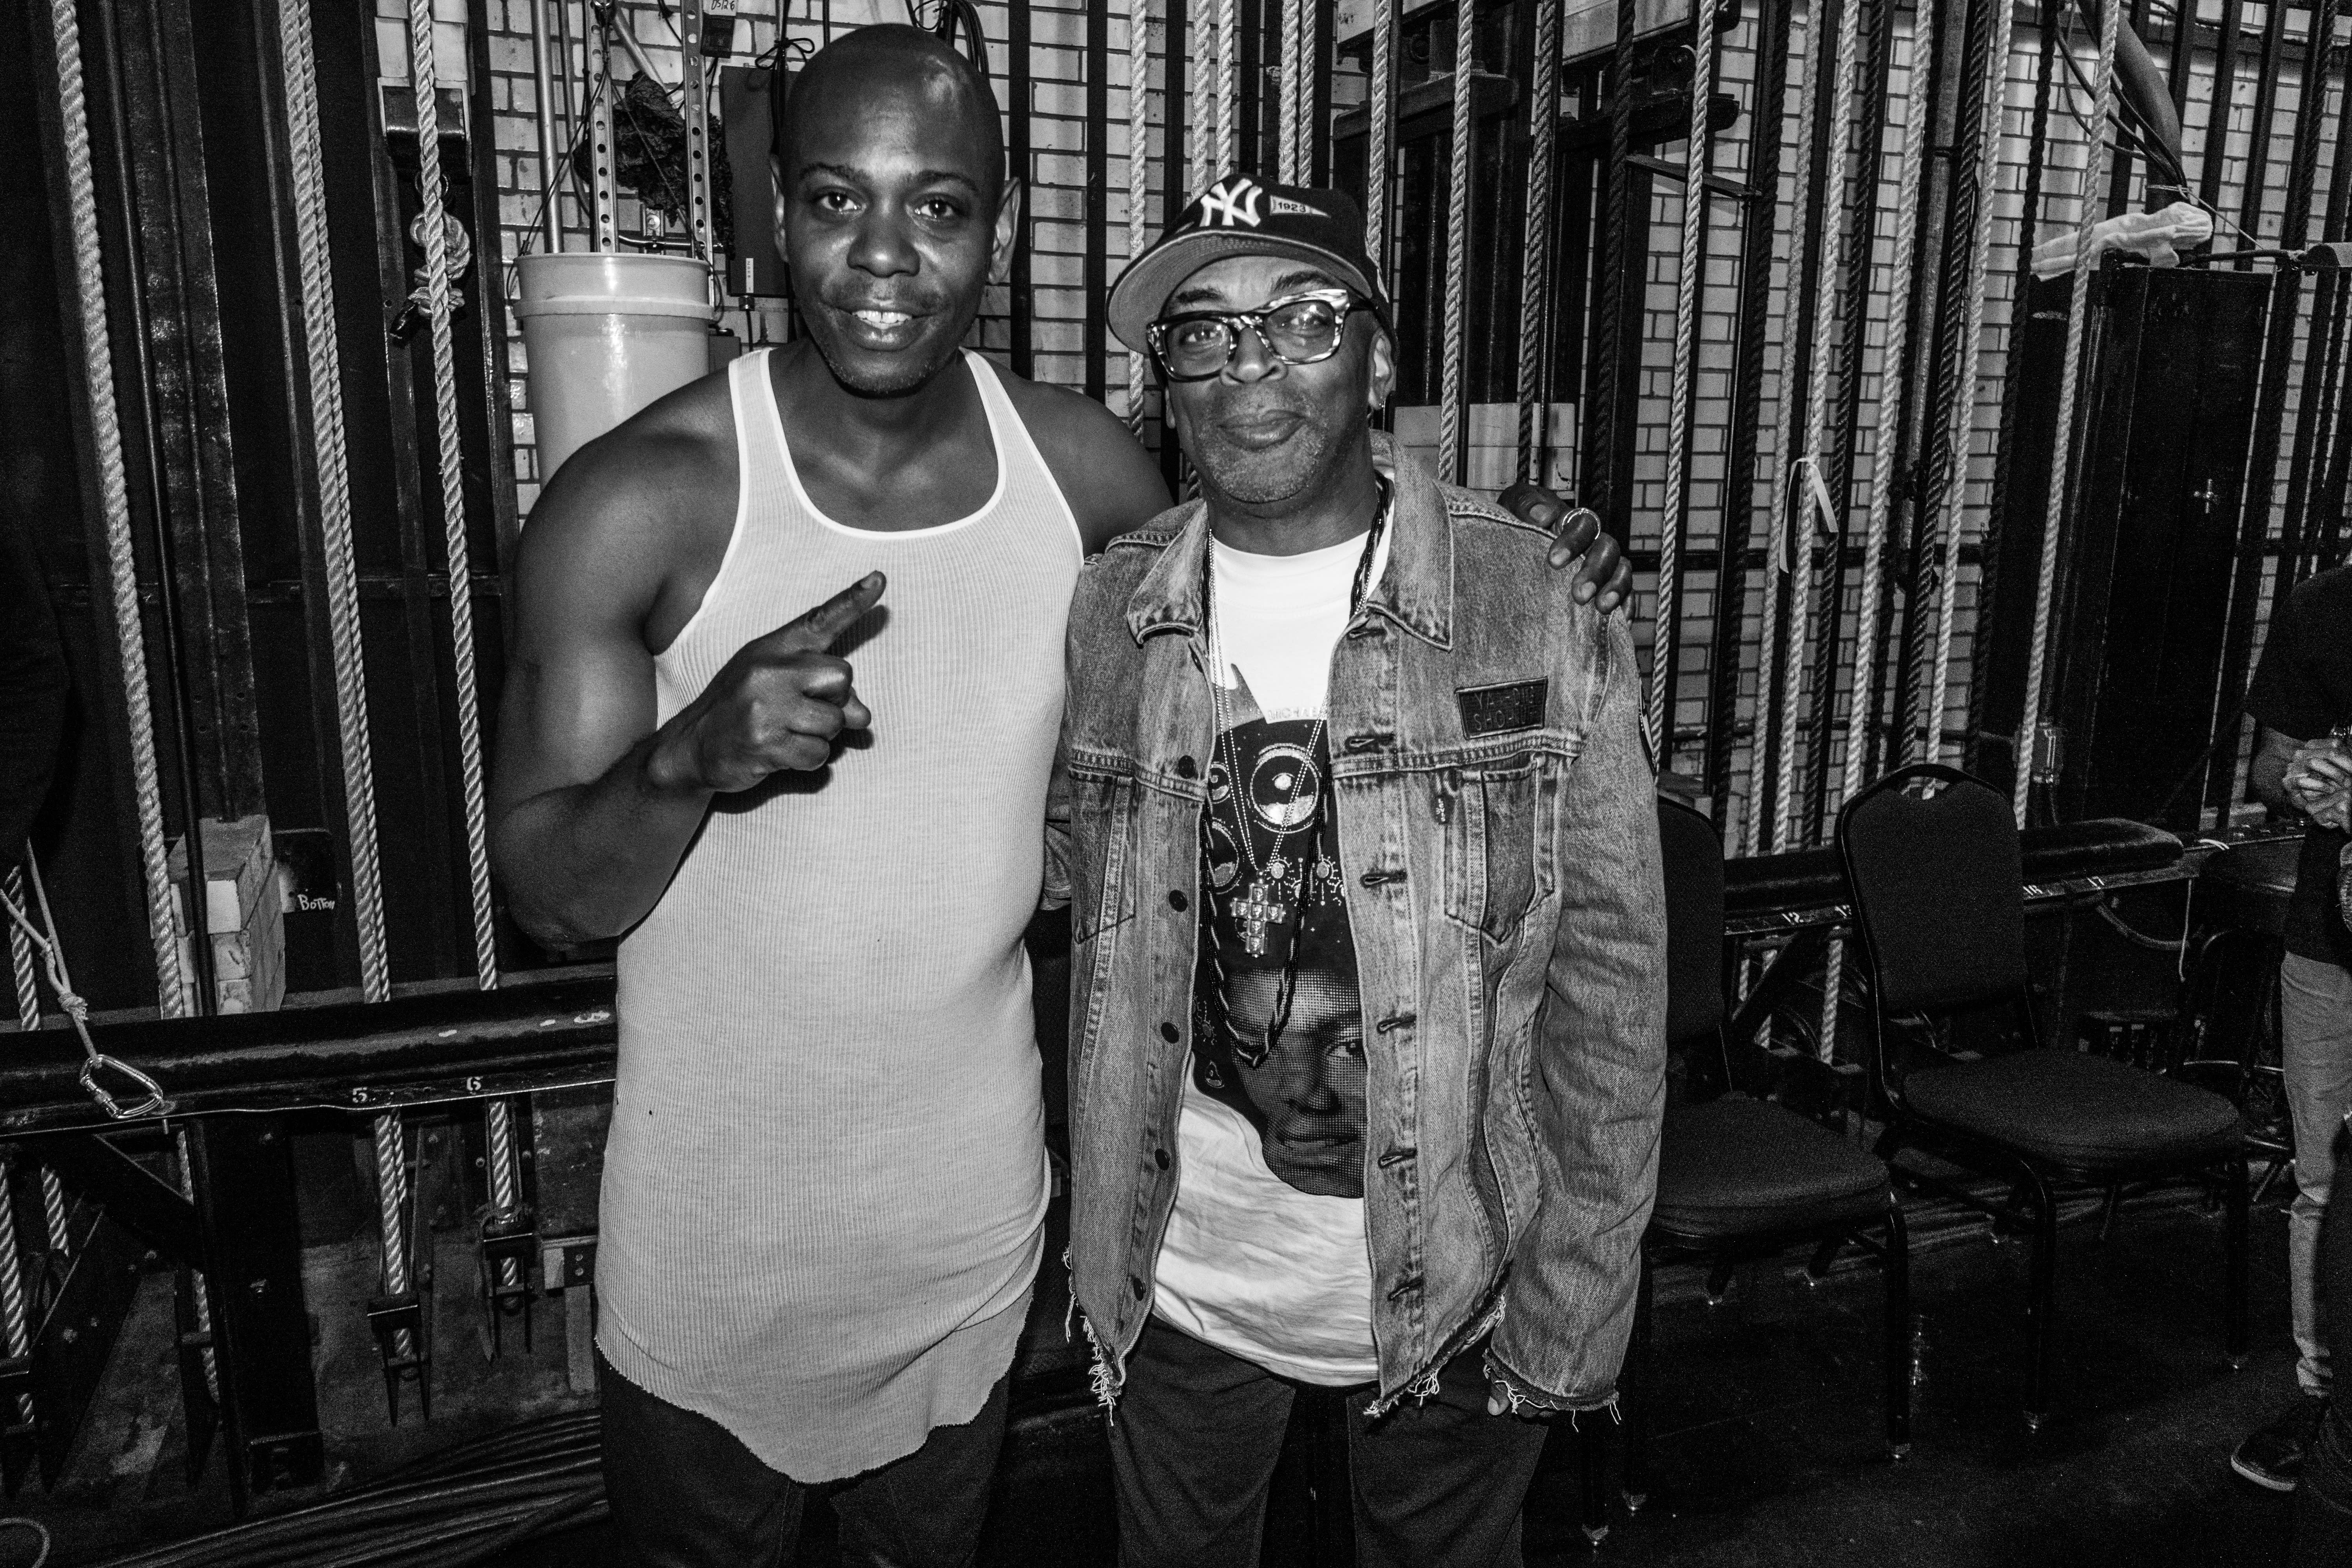 Dave Chappelle with auteur and prolific filmmaker Spike Lee backstage at Radio Music City Hall